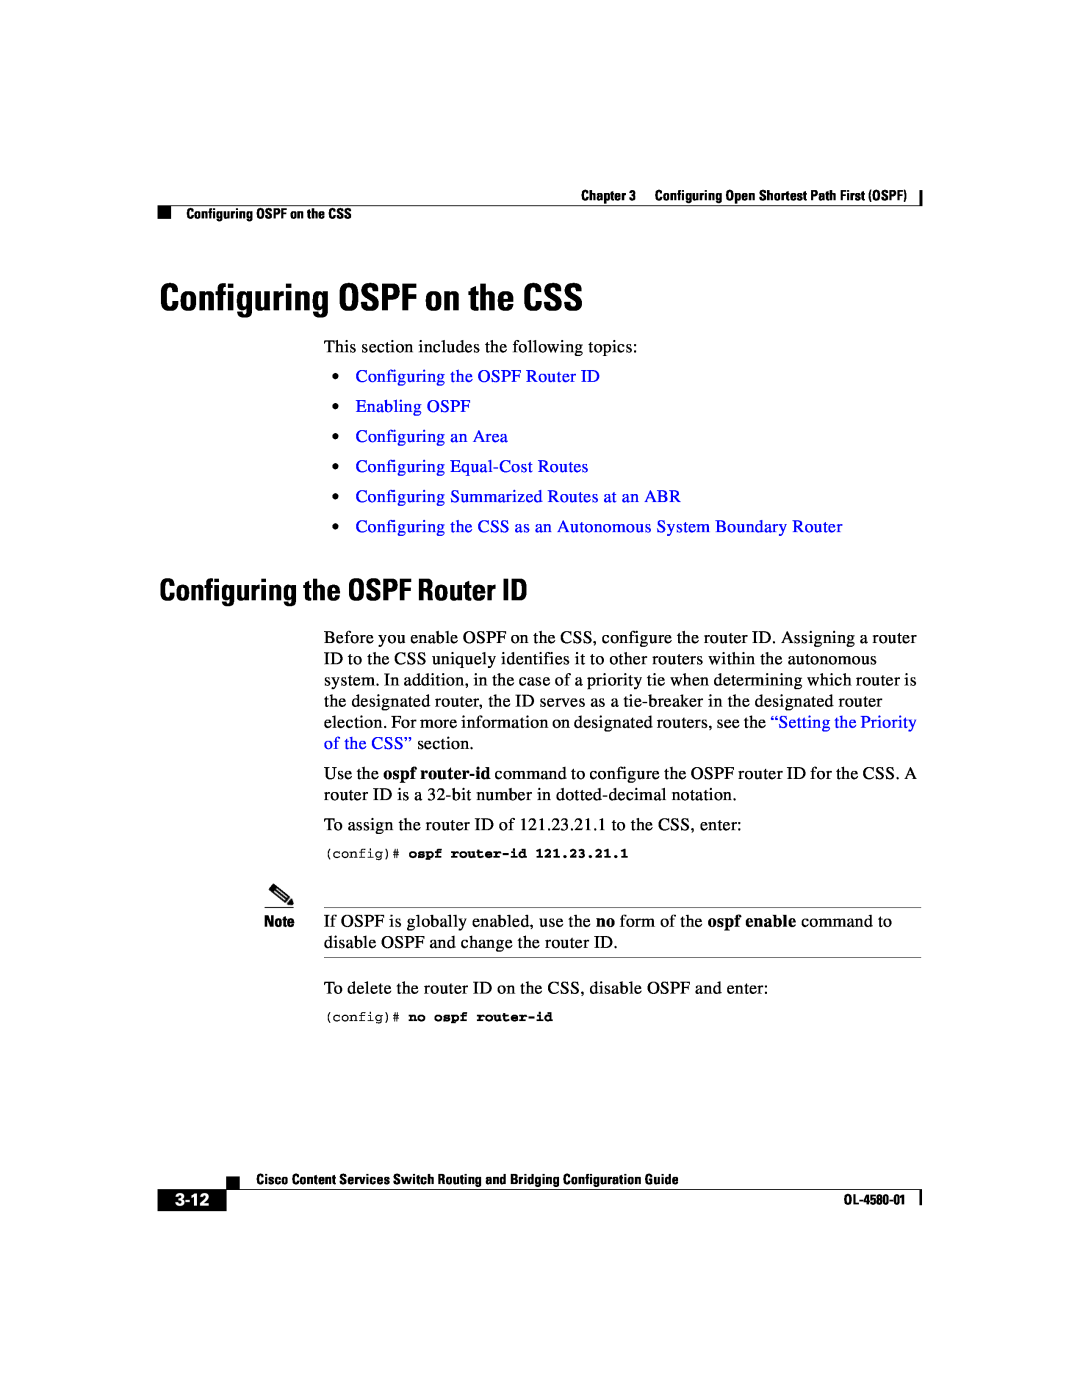 Cisco Systems OL-4580-01 manual Configuring OSPF on the CSS, Configuring the OSPF Router ID, 3-12 